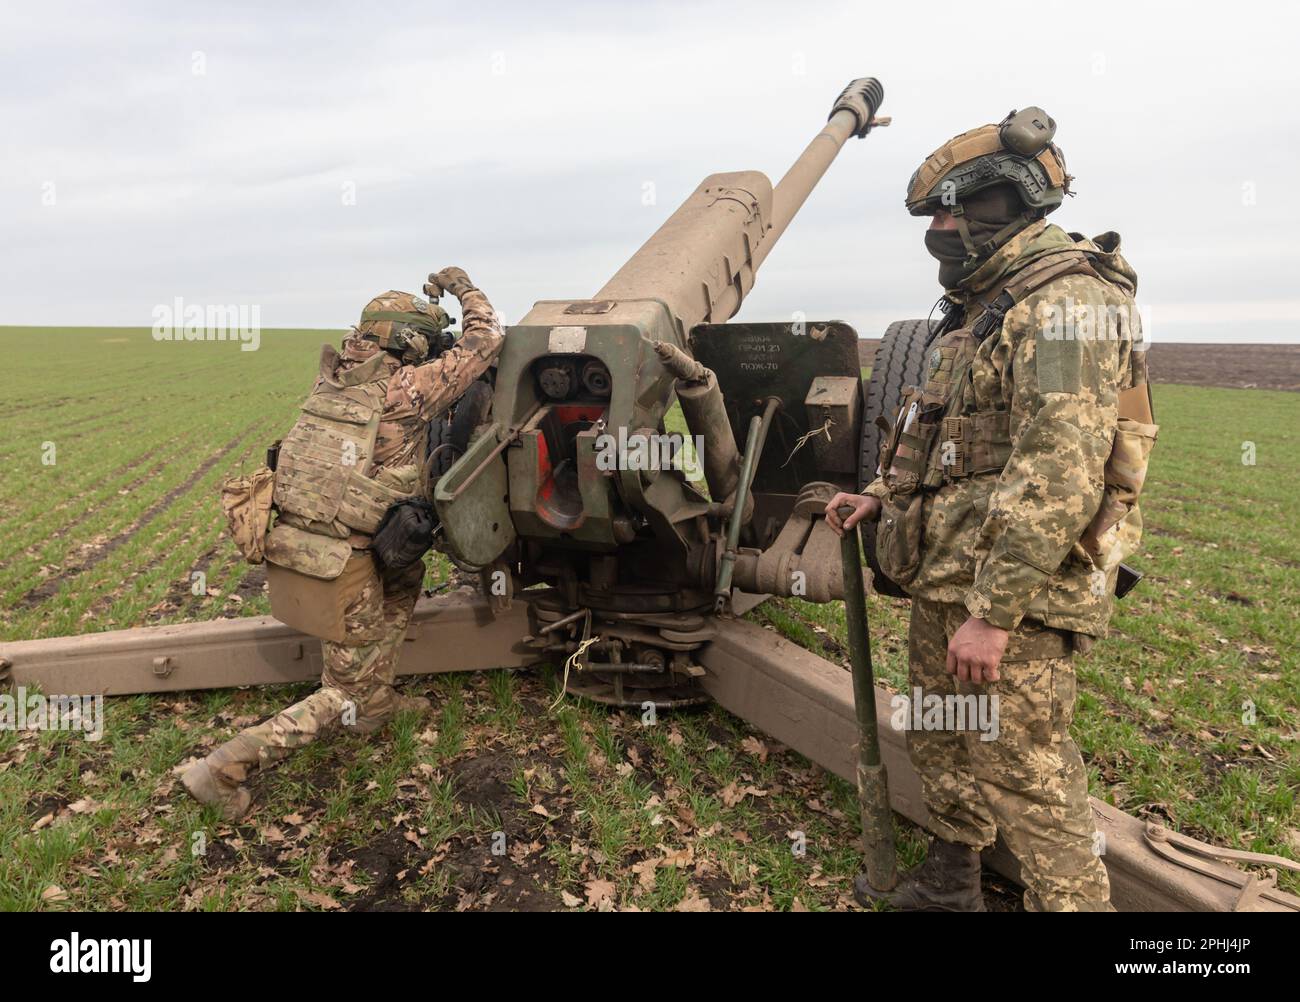 March 21, 2023, Donetsk region, Ukraine: A Ukrainian Armed Forces soldier is seen pointing a 122mm howitzer D-30 at a target before firing. Ukraine's state-owned defense conglomerate, Ukroboronprom, has delivered its first batch of domestically produced 122 mm artillery shells to the Ukrainian army. The 122 caliber projectile is used by the Ukrainian artillery while operating with the trailing D-30 howitzer (maximum range: 15,400 m) and 2S1 Gvozdika SAU (maximum range: 15,200 m). This is part of Ukraine's efforts to increase its self-sufficiency and security by launching its own production of Stock Photo